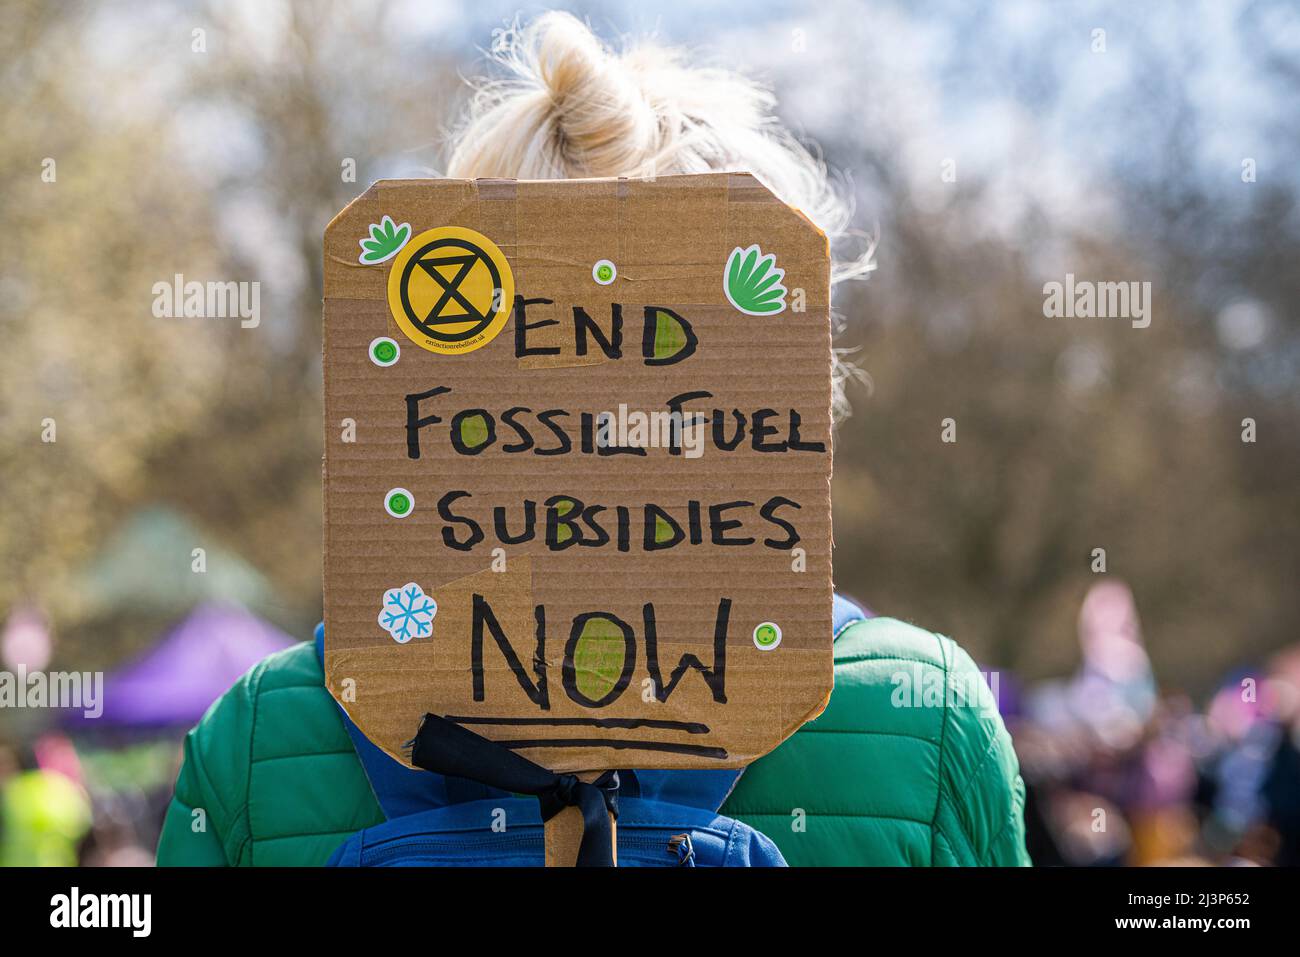 LONDON, UK. 9 April, 2022 .   A climate activist from Extinction Rebellion with a sign "End fossil fuel subsidies" in Hyde Park  before marching to central London to demand climate justice and  an end to the fossil fuel economy. Extinction Rebellion has vowed to bring  more disruptive protests  planned around Easter to London.  Credit: amer ghazzal/Alamy Live News Stock Photo